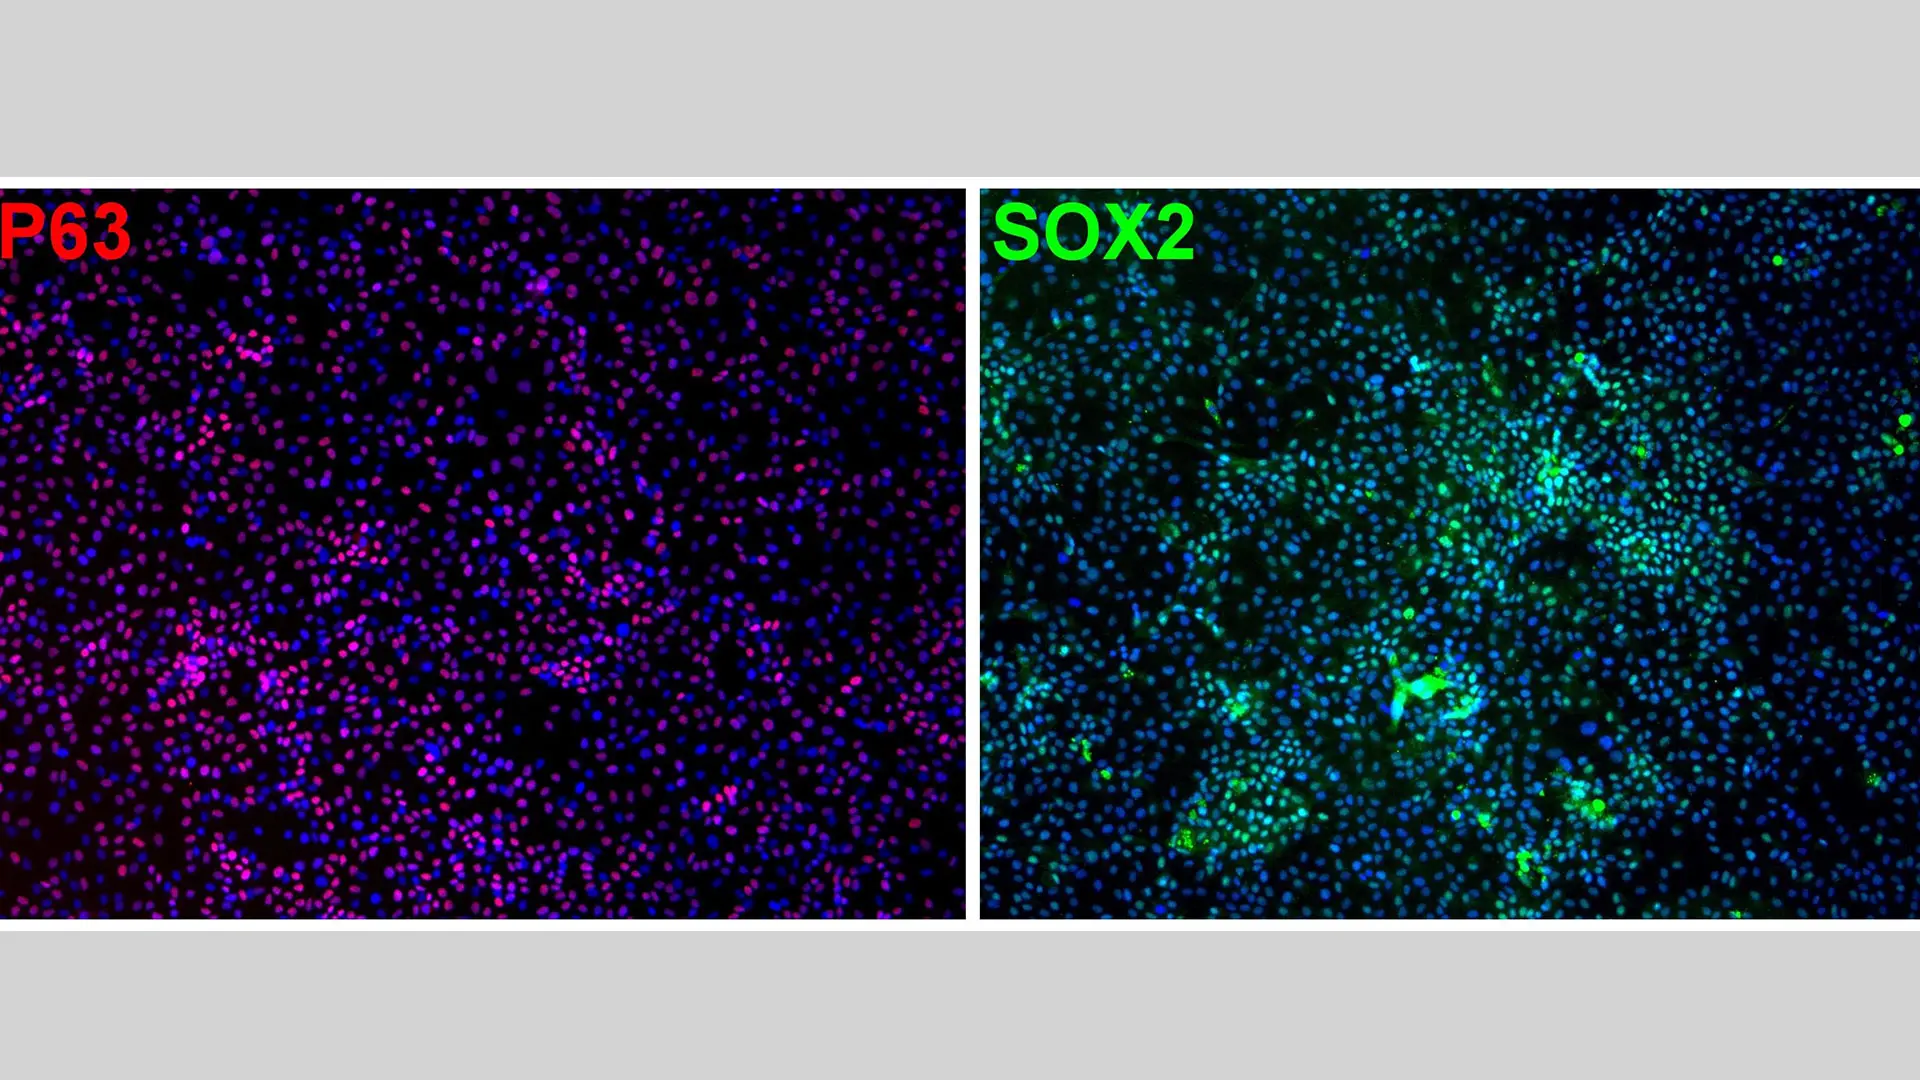 Immunofluorescence staining of markers expressed in basal cells. 